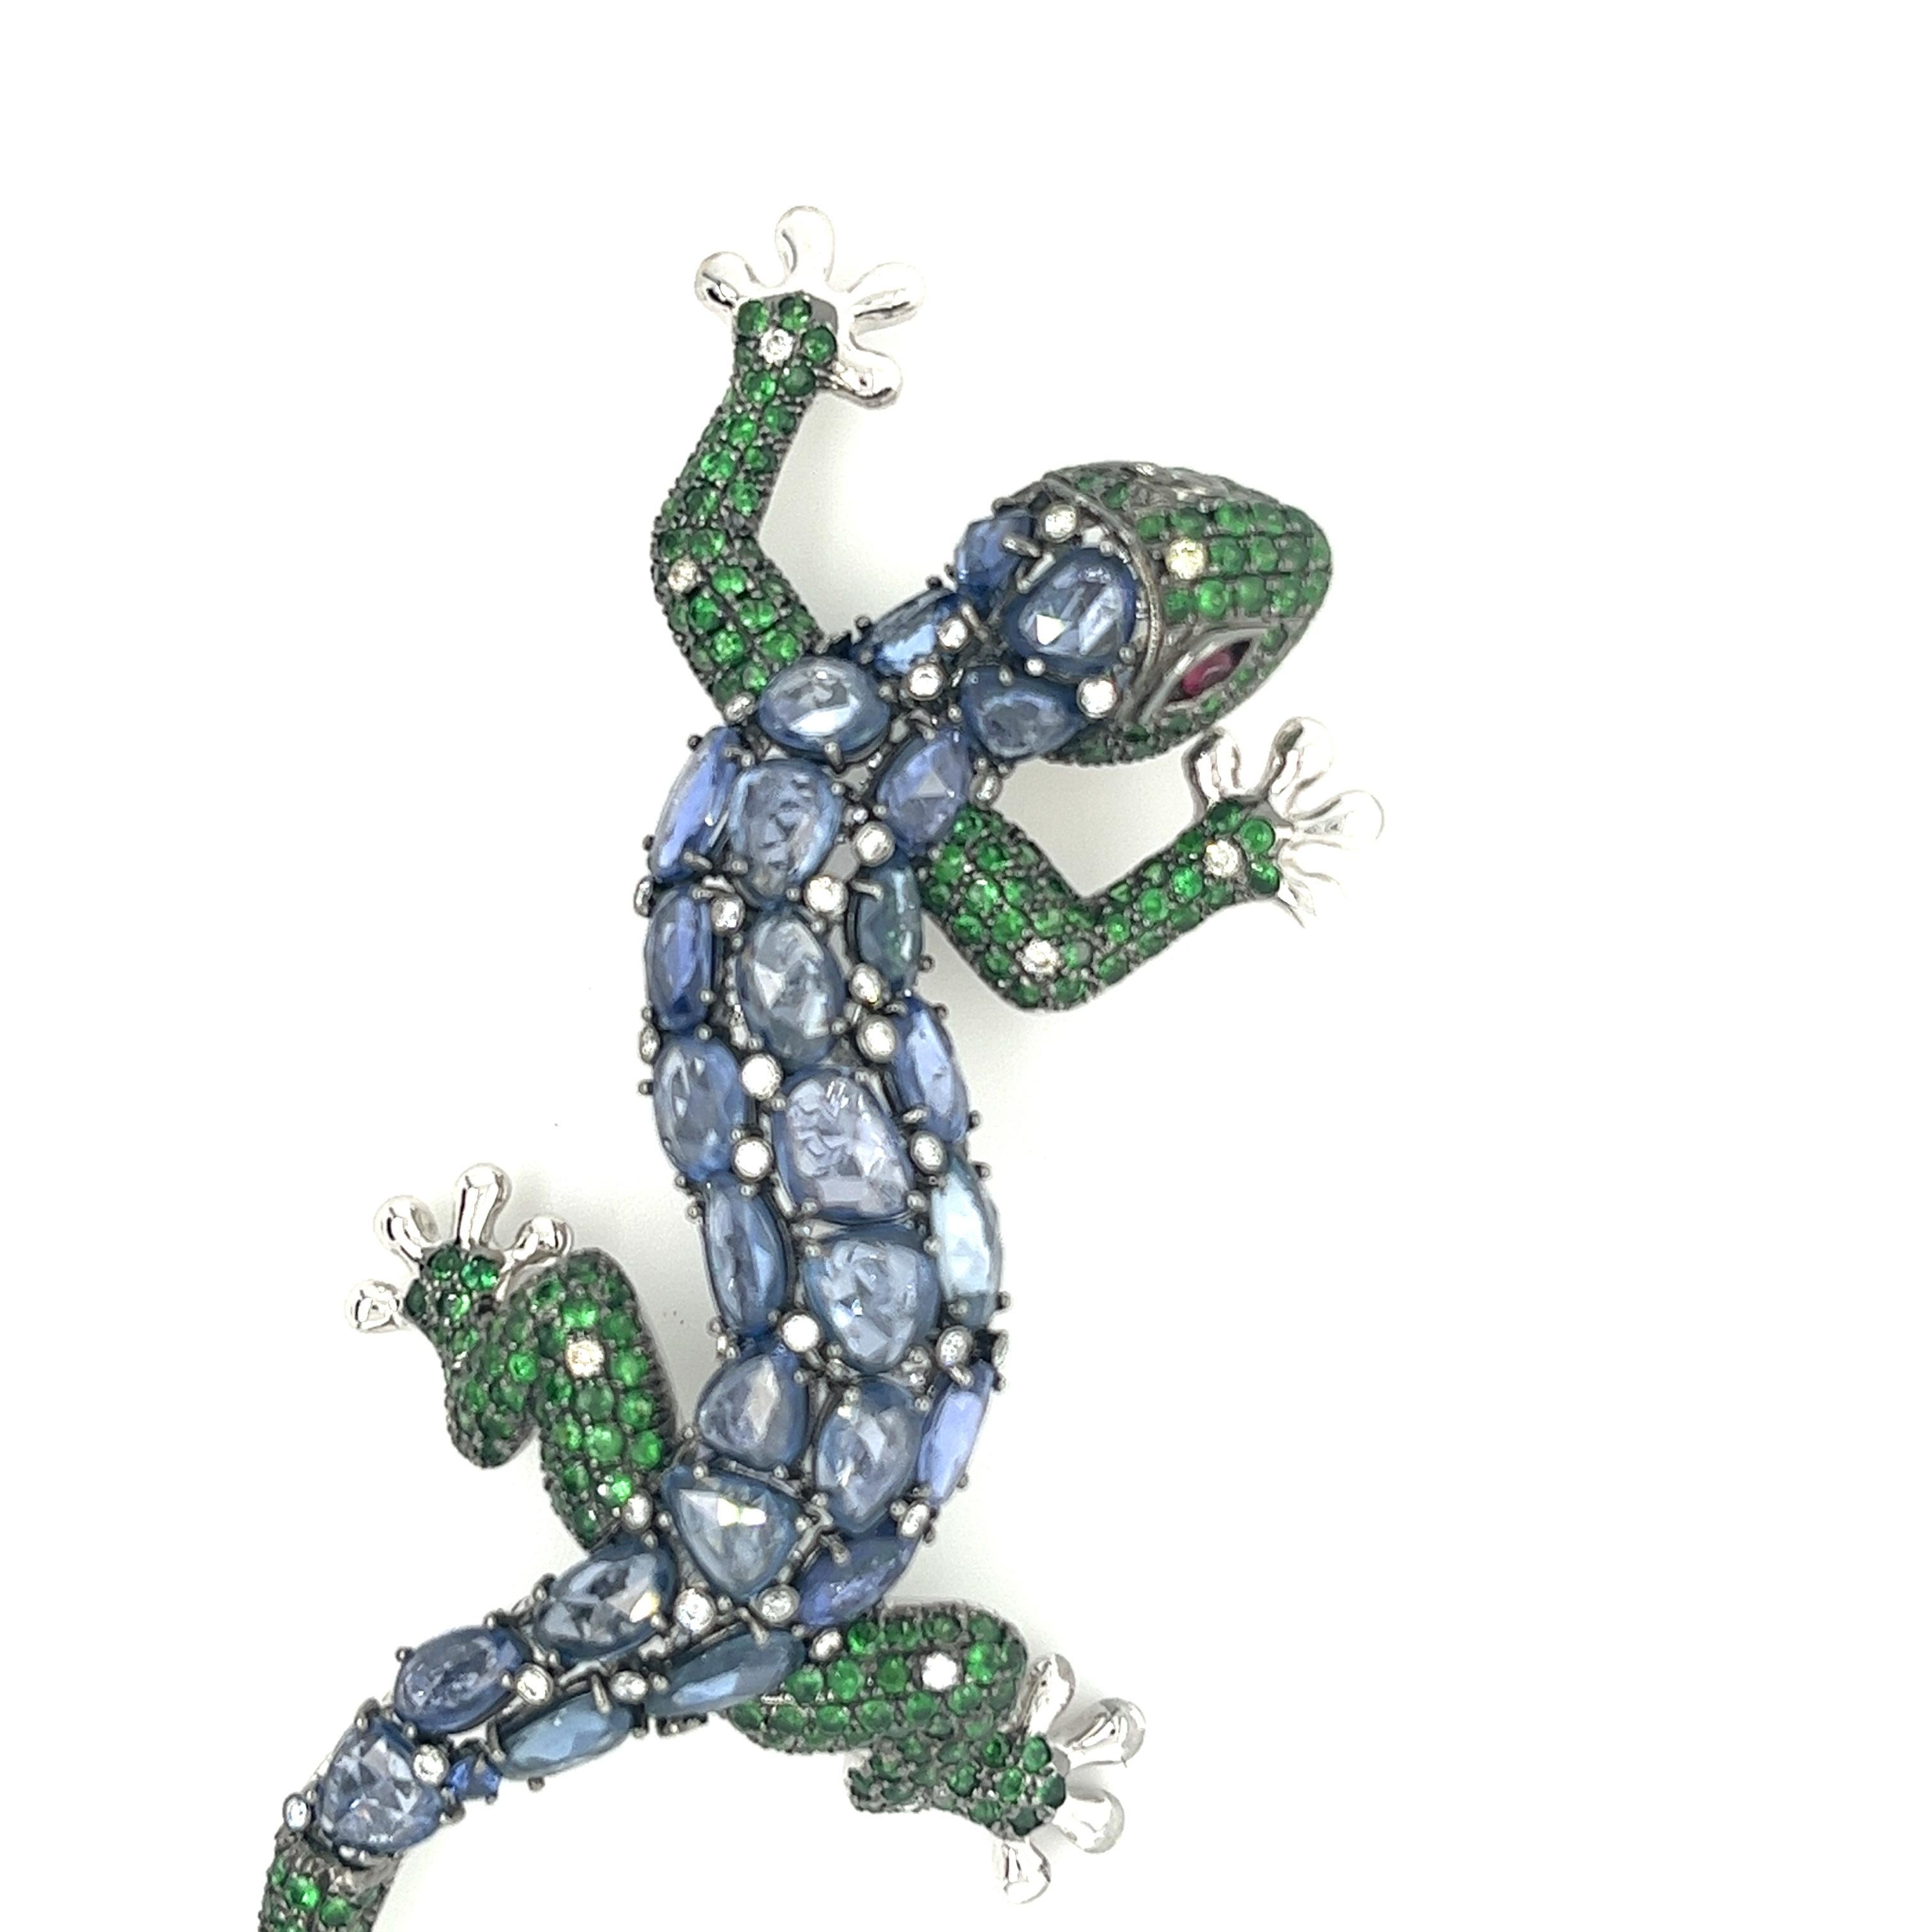 18K White Gold Gecko Brooch with
Diamonds & Blue Sapphires
 & Green Garnets
43 Diamonds - 0.39 CT
28 Blue Sapphires - 13.67 CT
232 Green Garnets - 3.76 CT
2 Rubies - 0.10 CT
18K White Gold - 22.82 GM
Introducing our exquisite 18K White Gold Gecko